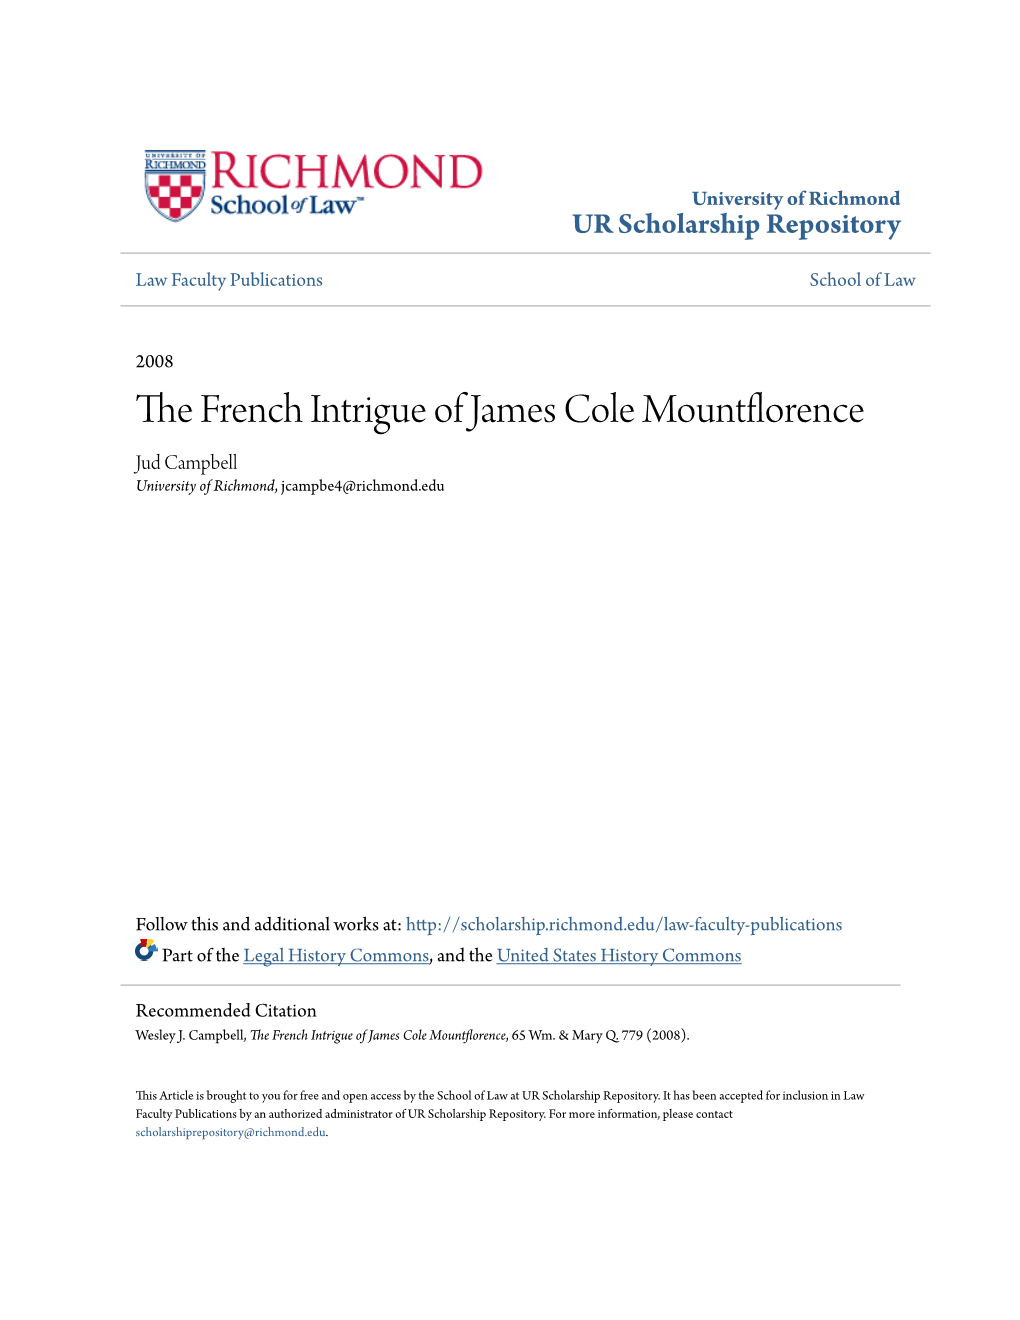 The French Intrigue of James Cole Mountflorence, 65 Wm